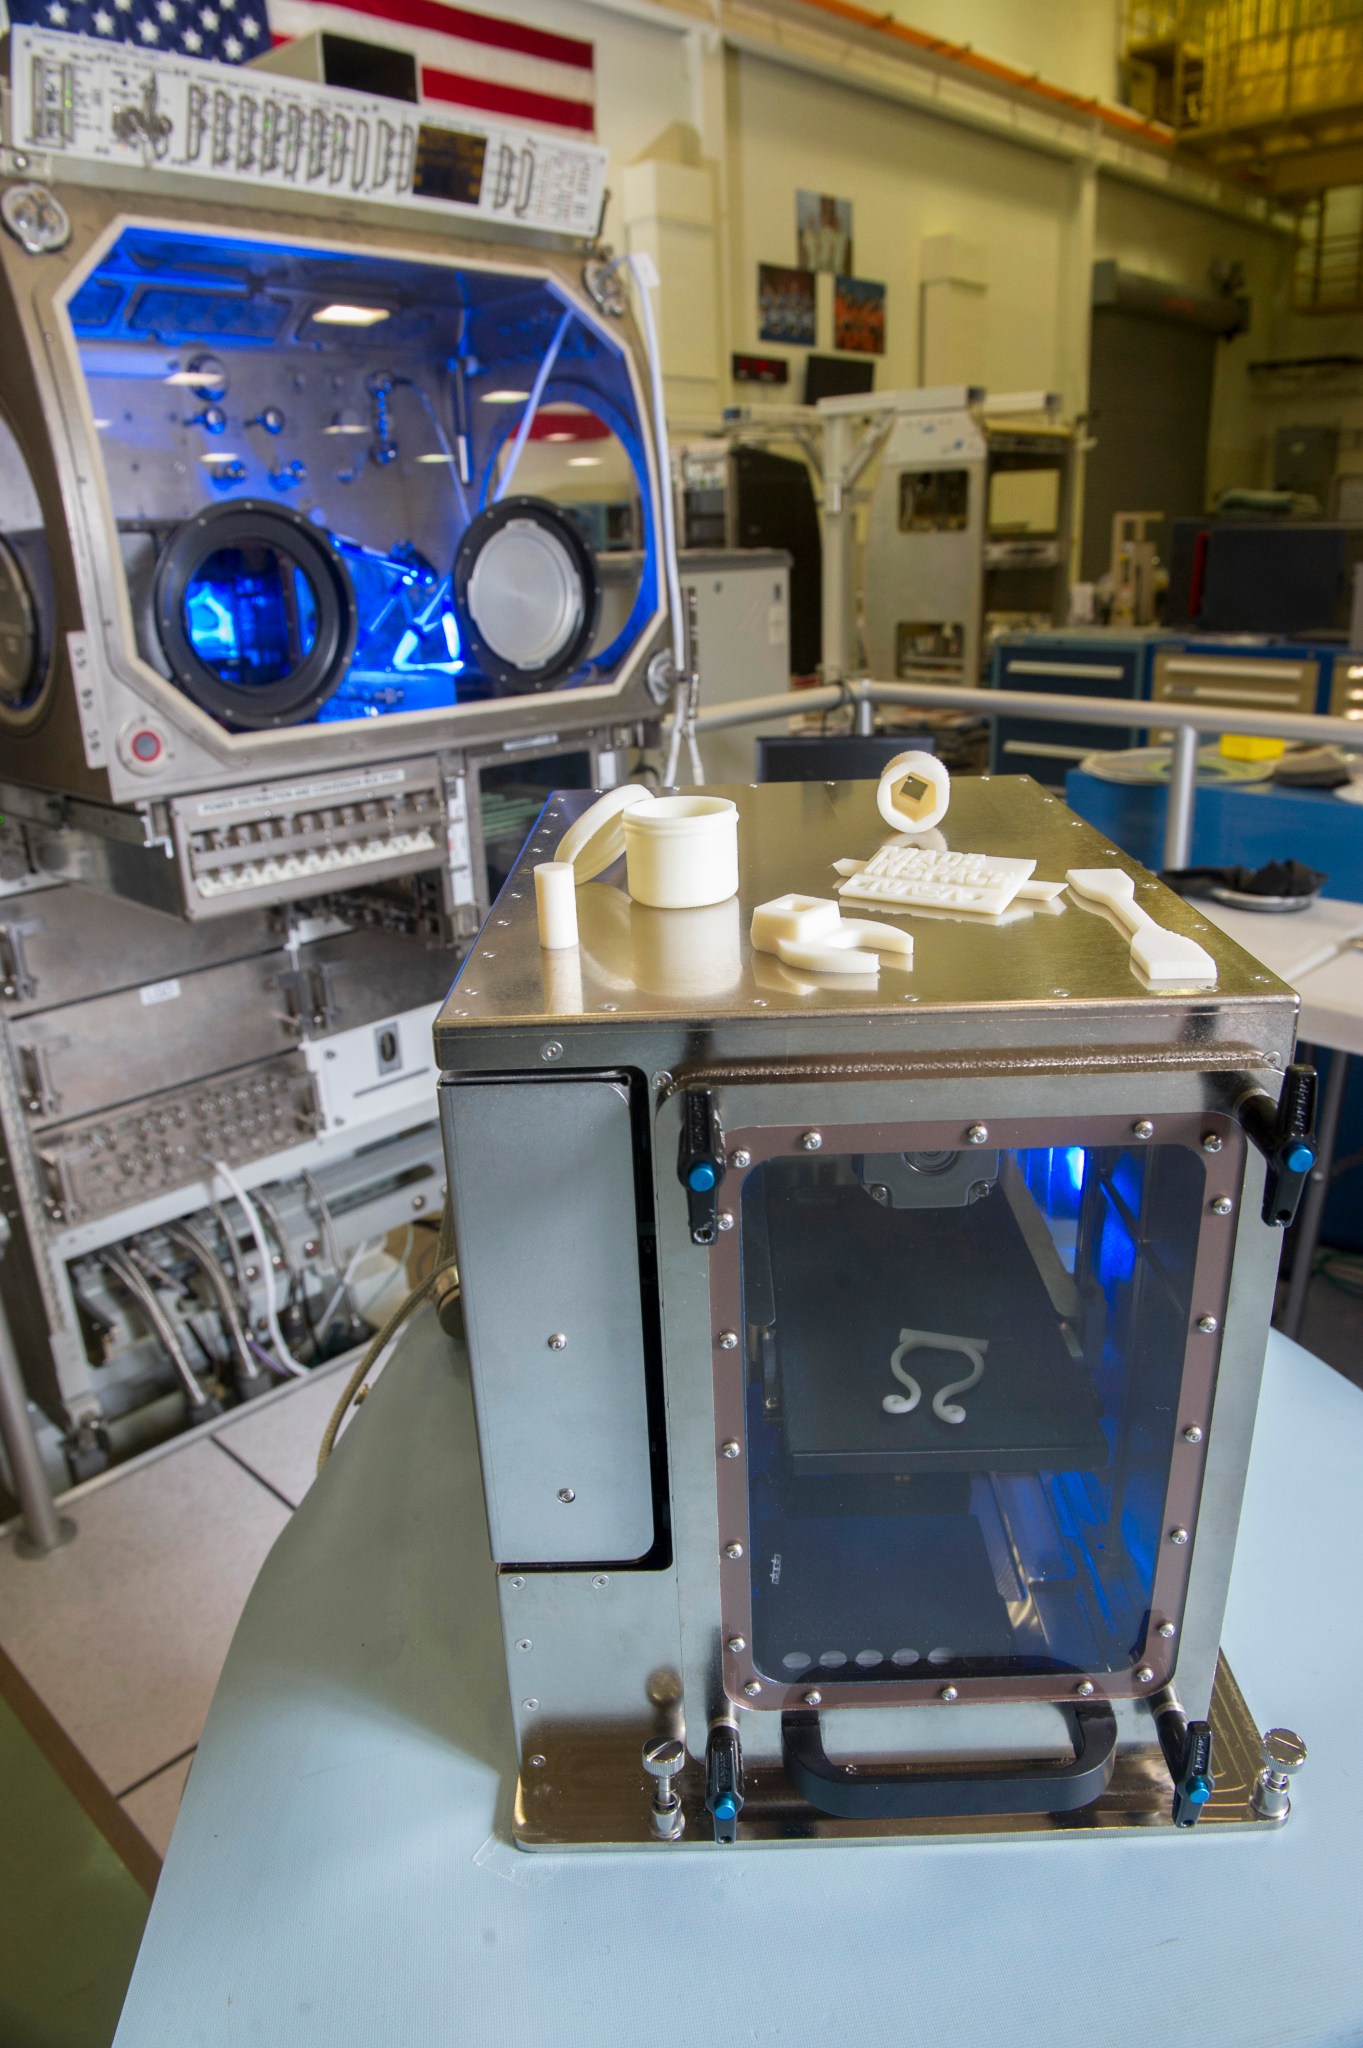 NASA funds lab to demonstrate 'replicator' 3D printer to produce cartilage  in space